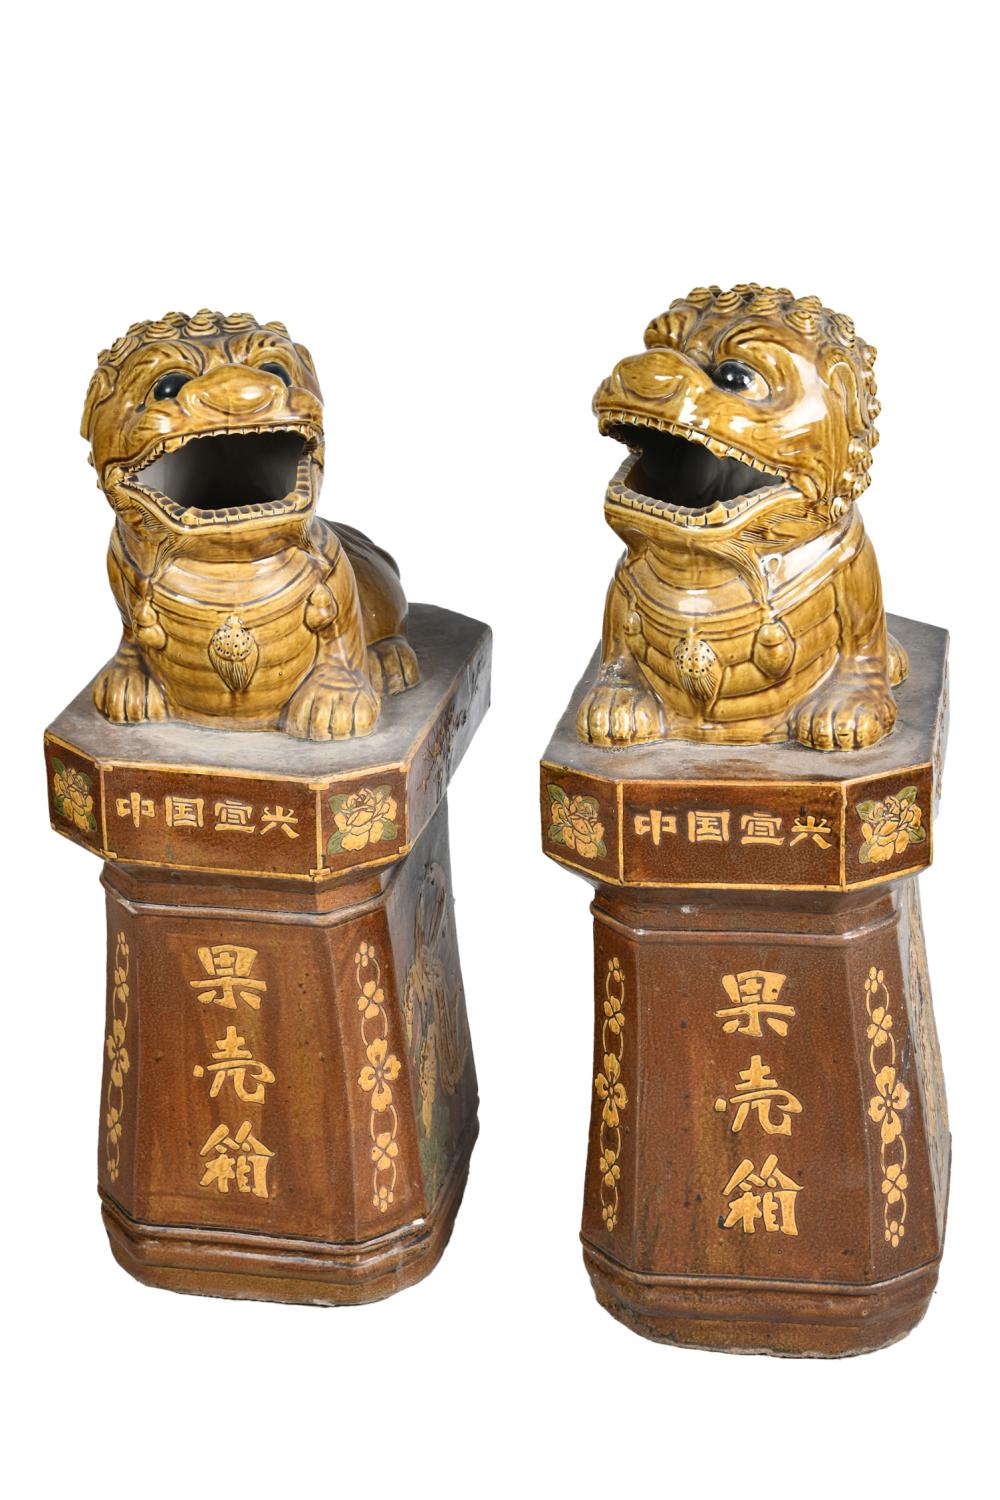 PAIR OF CHINESE GLAZED EARTHENWARE 33297d